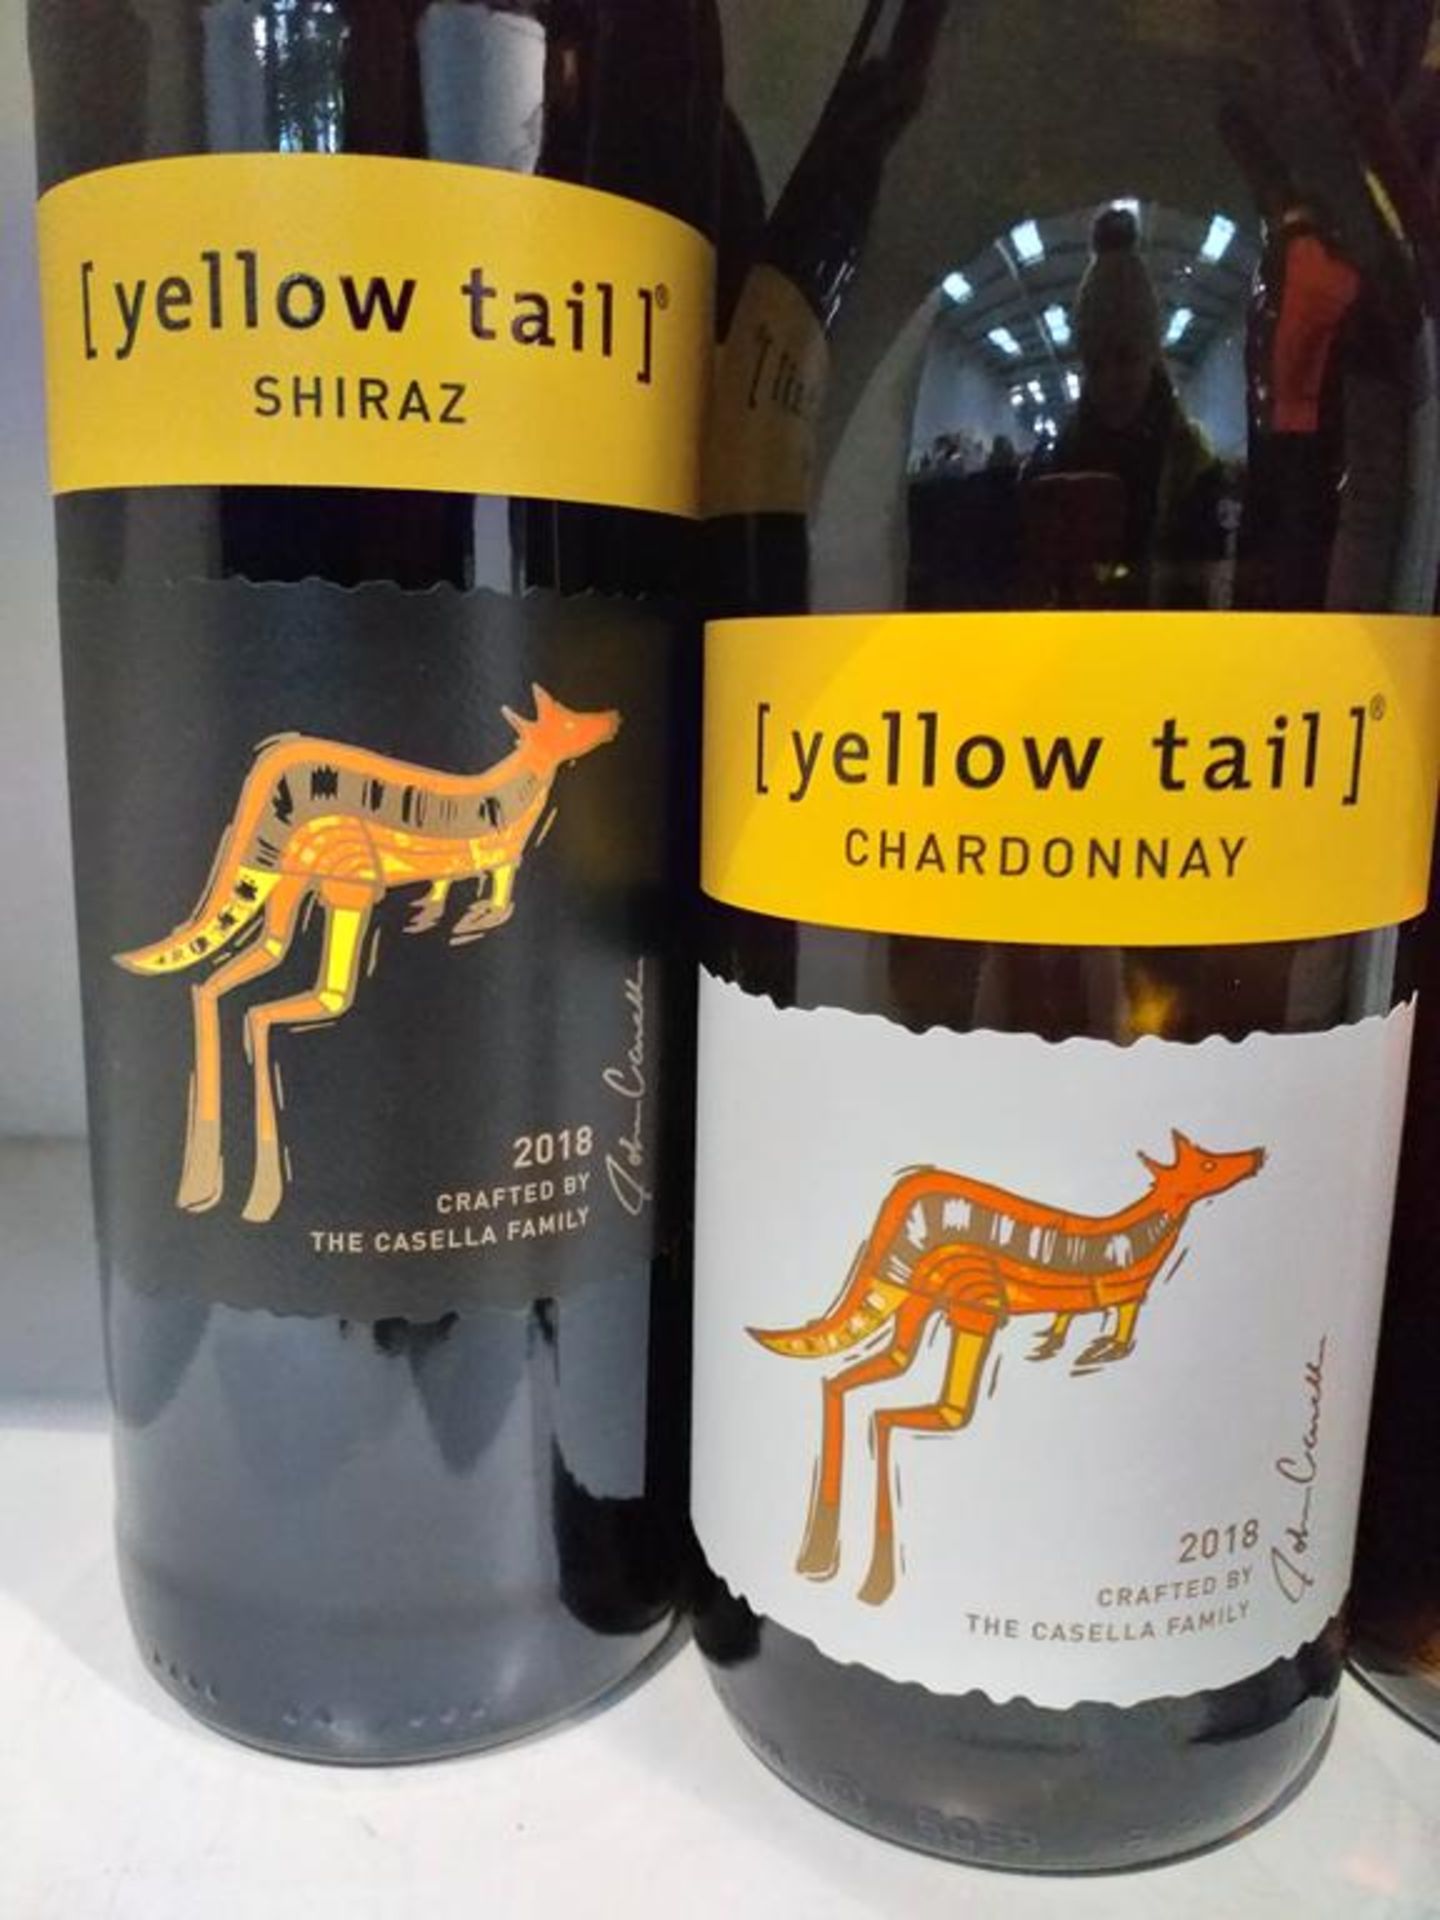 Eleven bottles of Yellow Tail wine: three bottles of 2018 Shiraz red wine, three bottles of 2018 Cha - Image 4 of 9